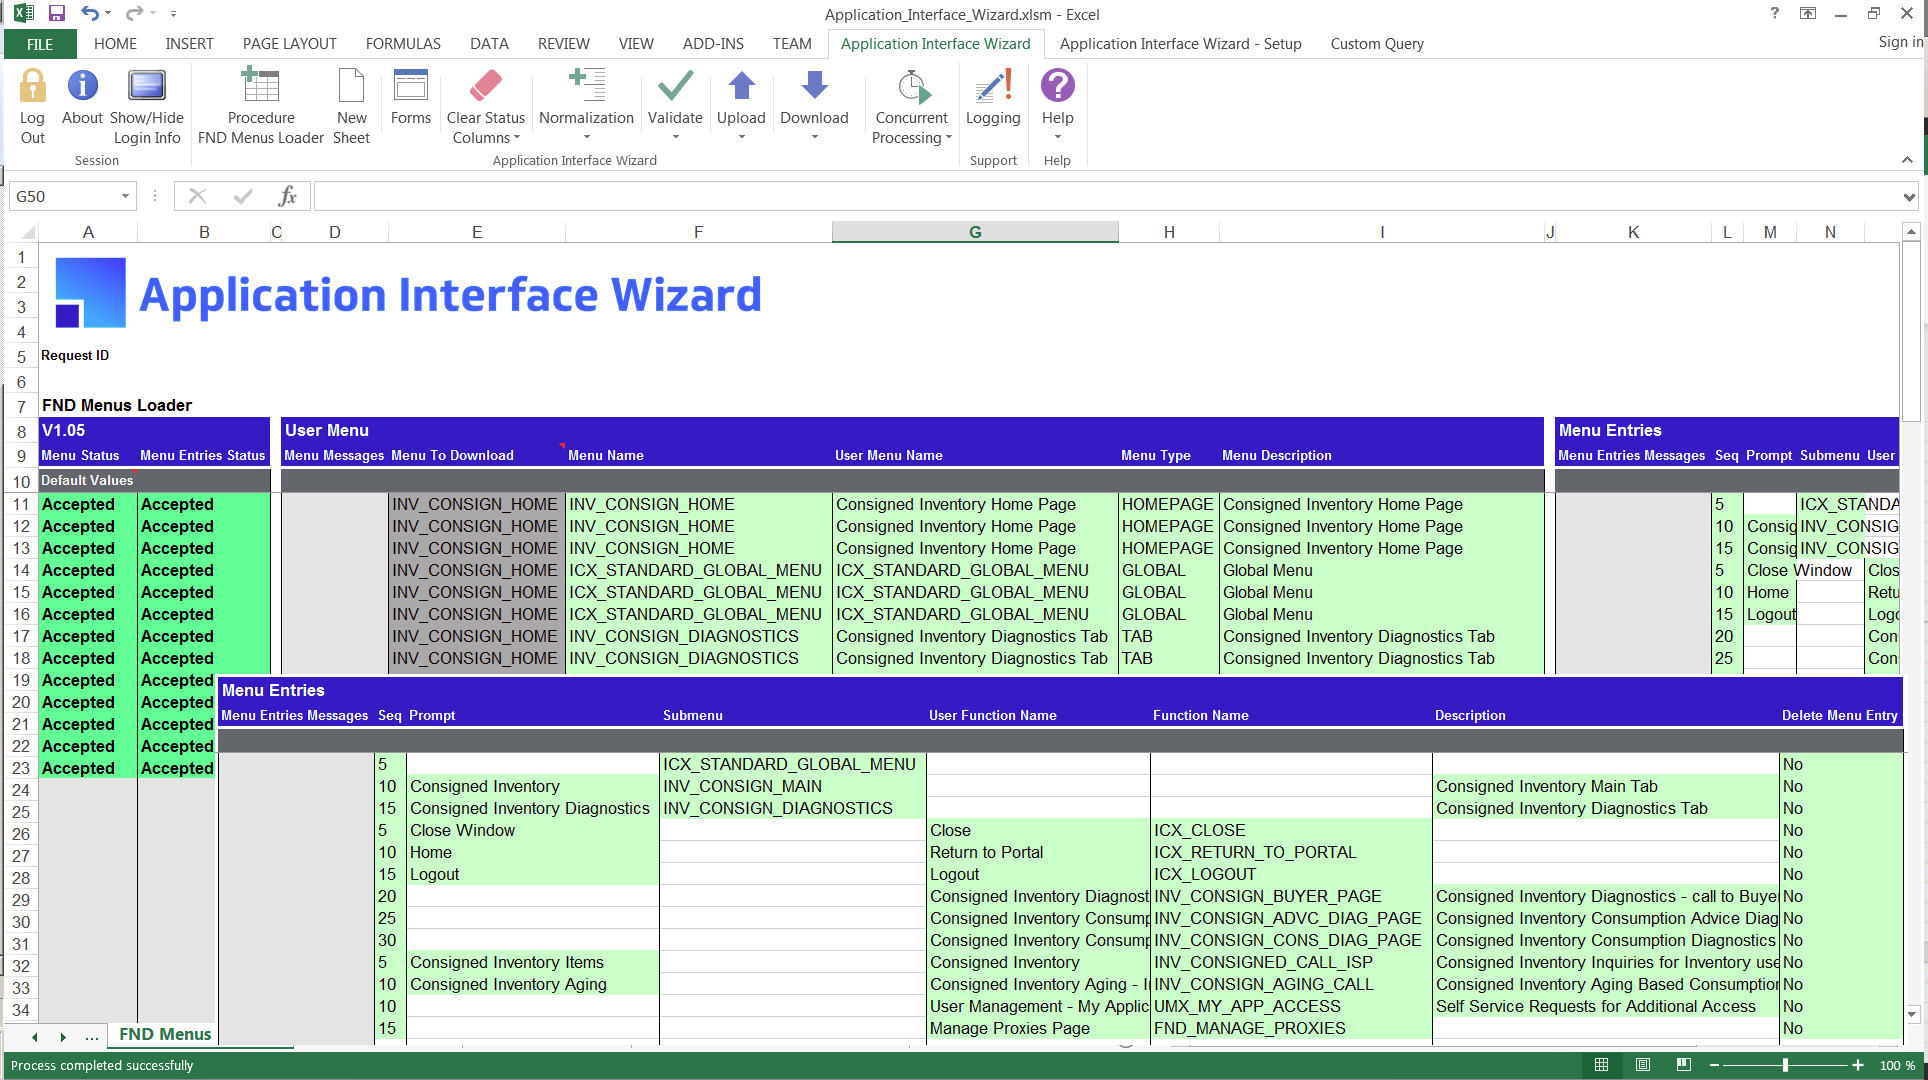 More4apps Application Interface Wizard from the Oracle EBS Toolbox